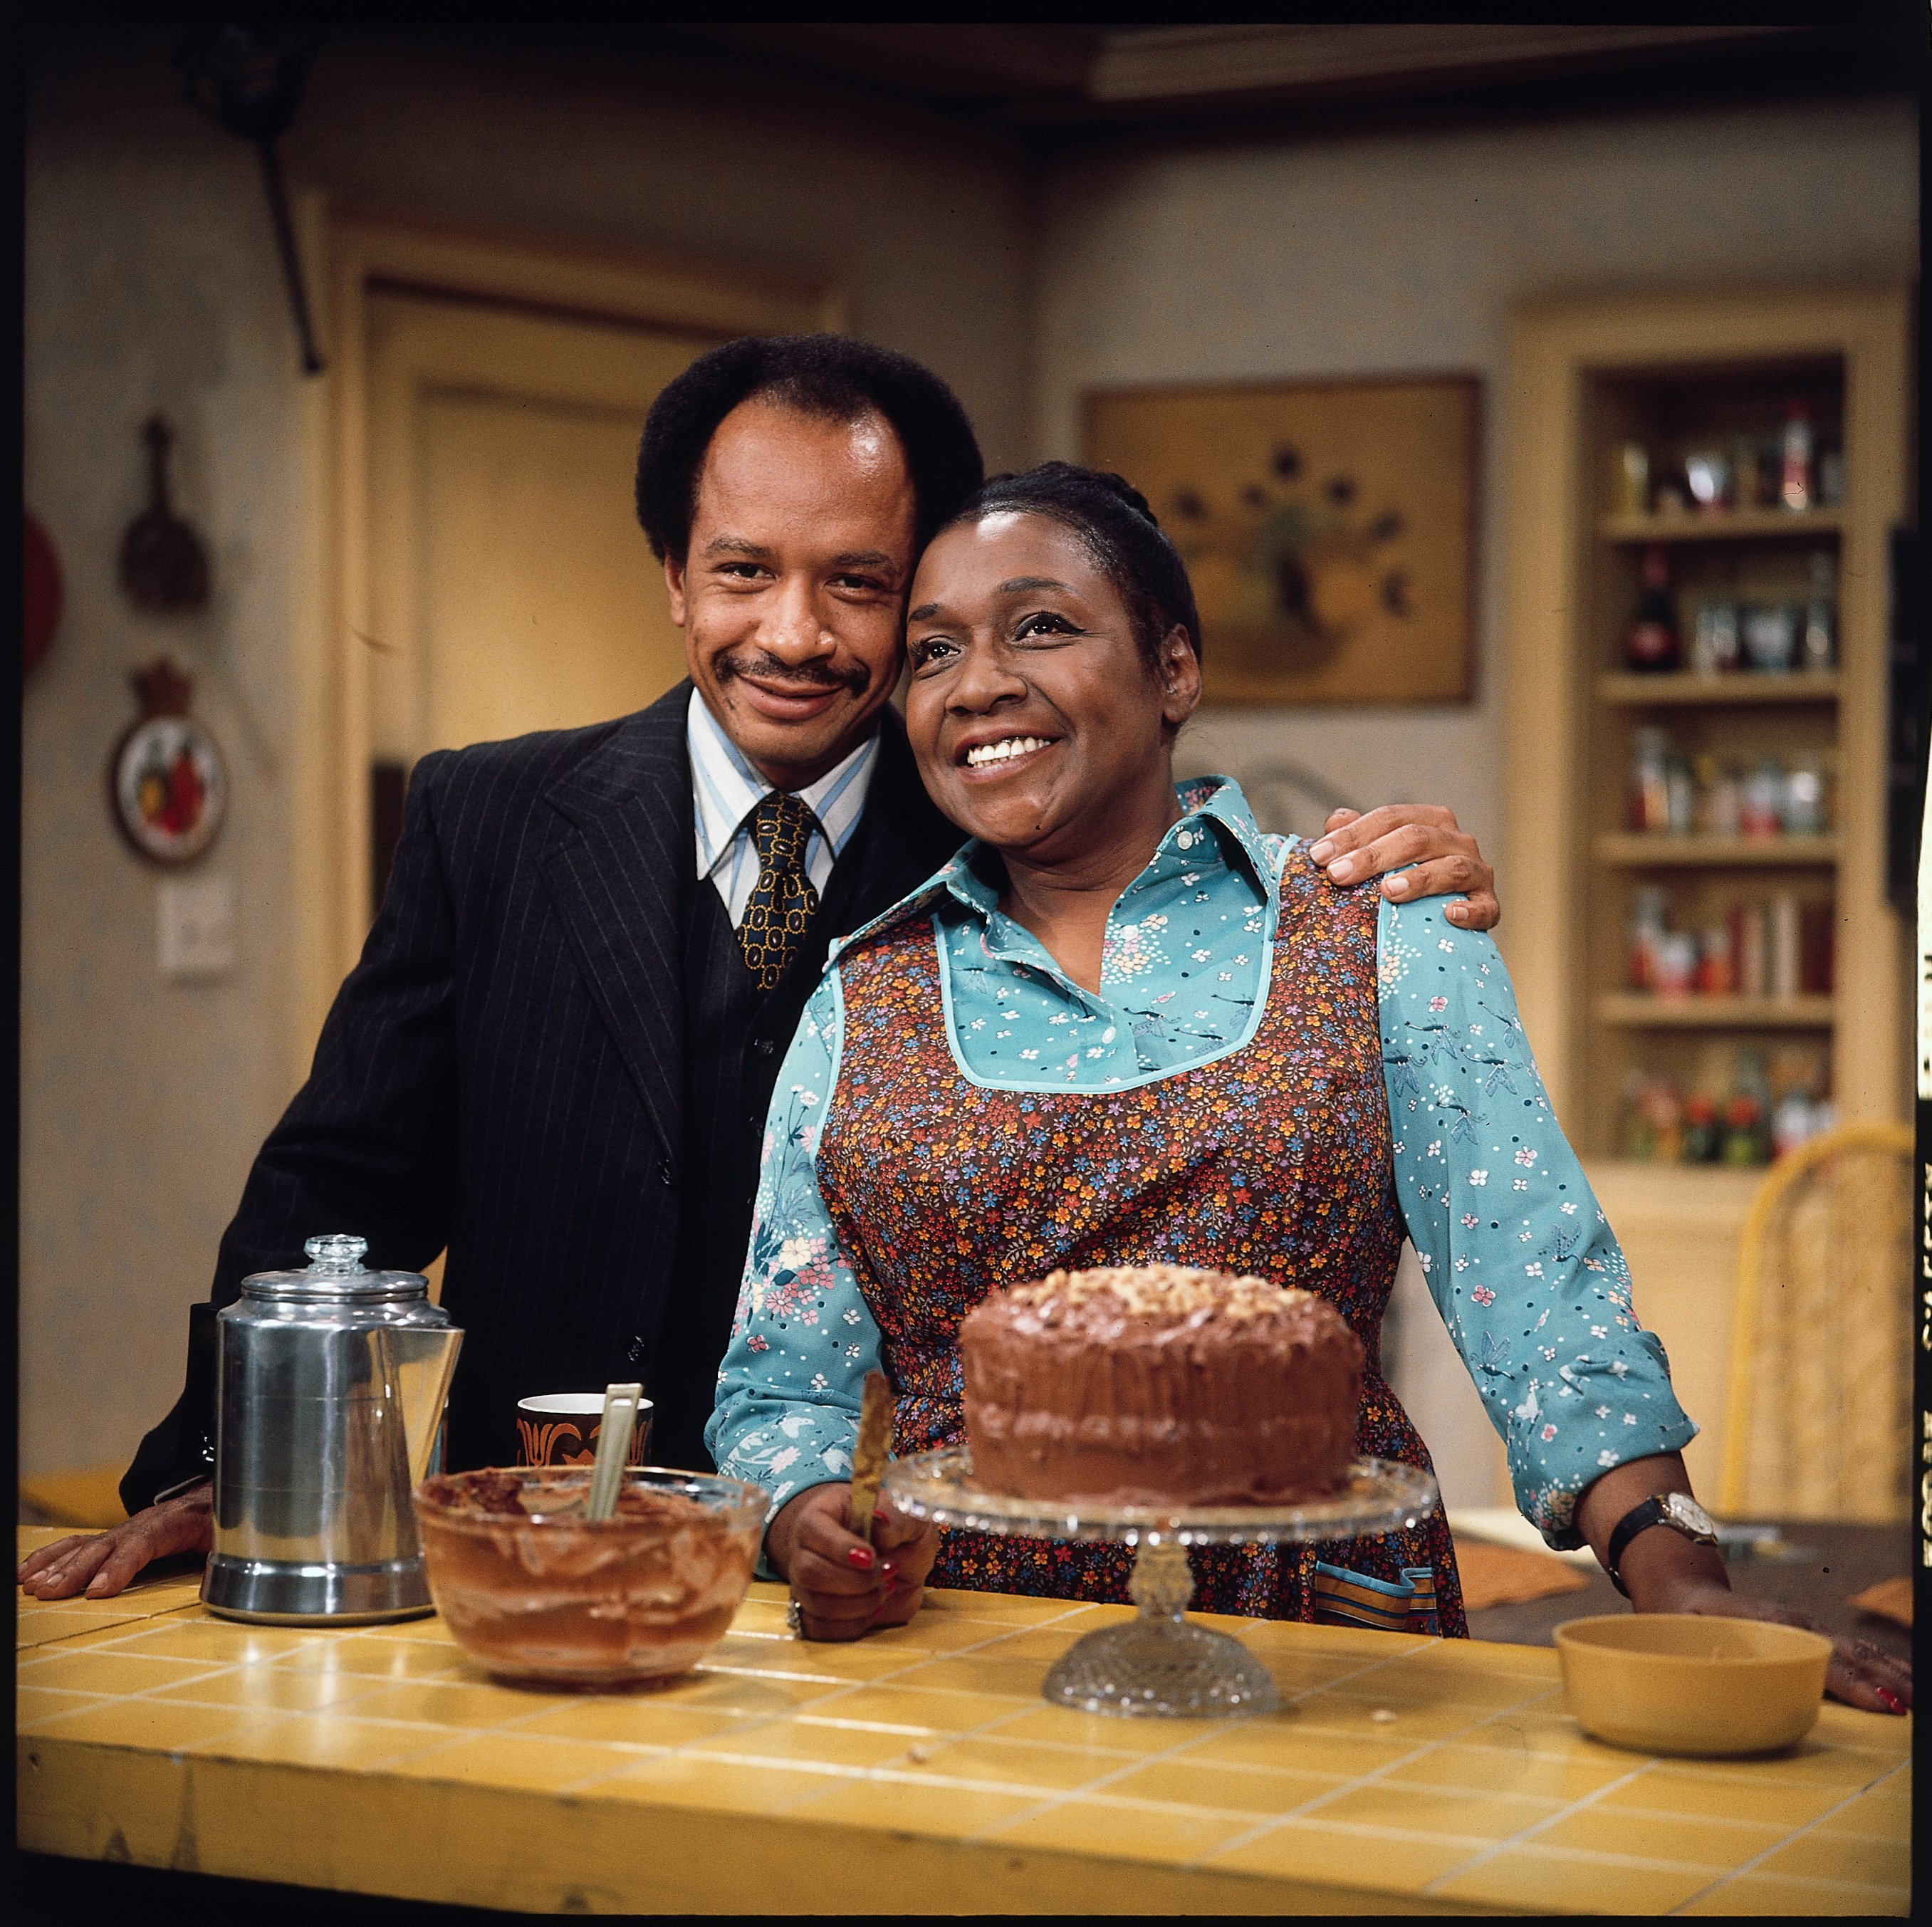 ...on-air husband, Sherman Hemsley as George Jefferson from the CB comedy, ...